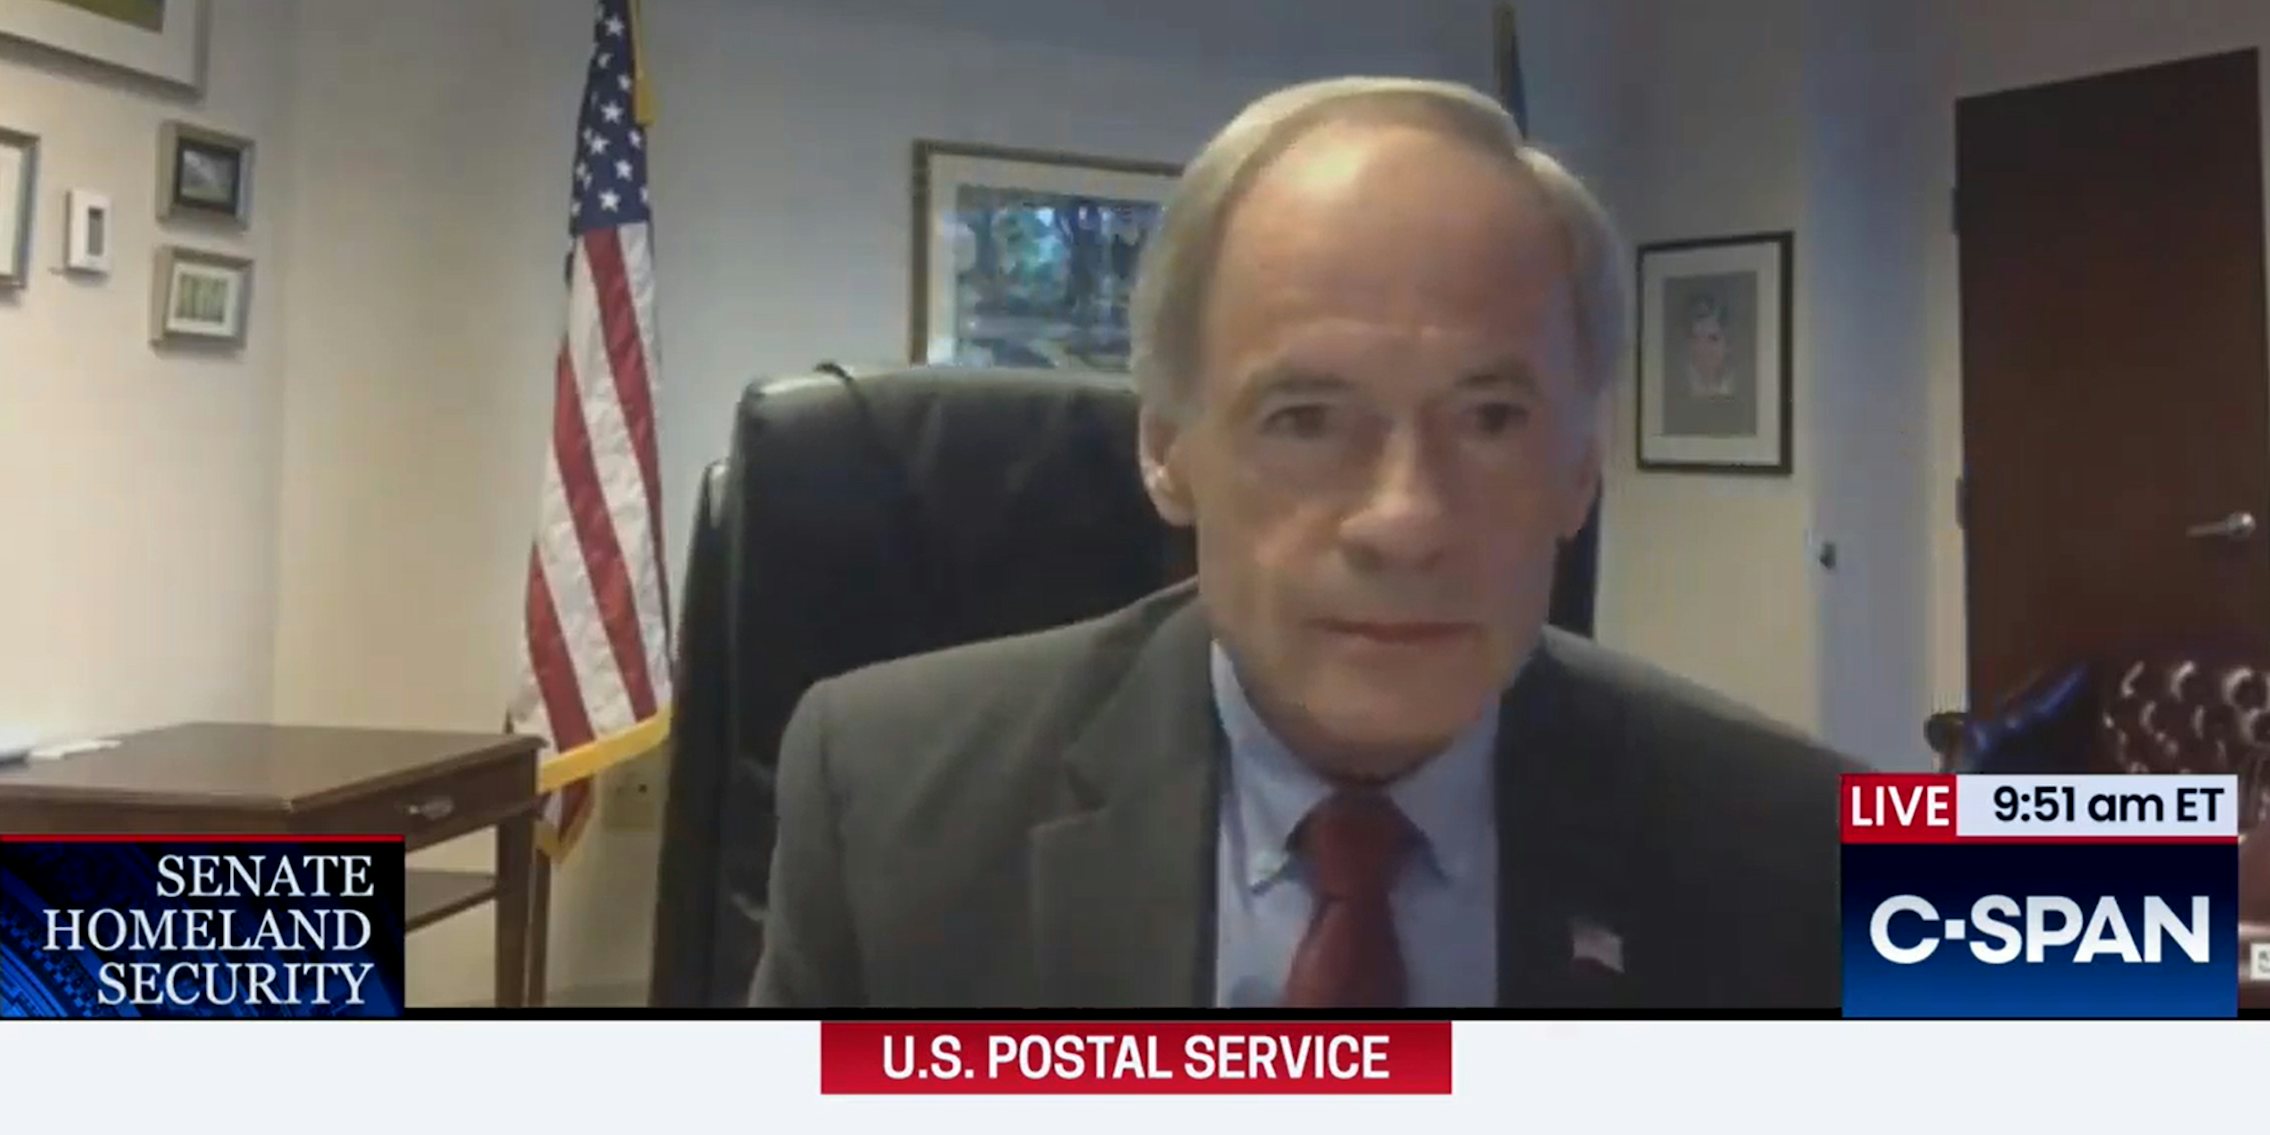 tom carper after saying 'fuck fuck fuck' during live C-SPAN coverage